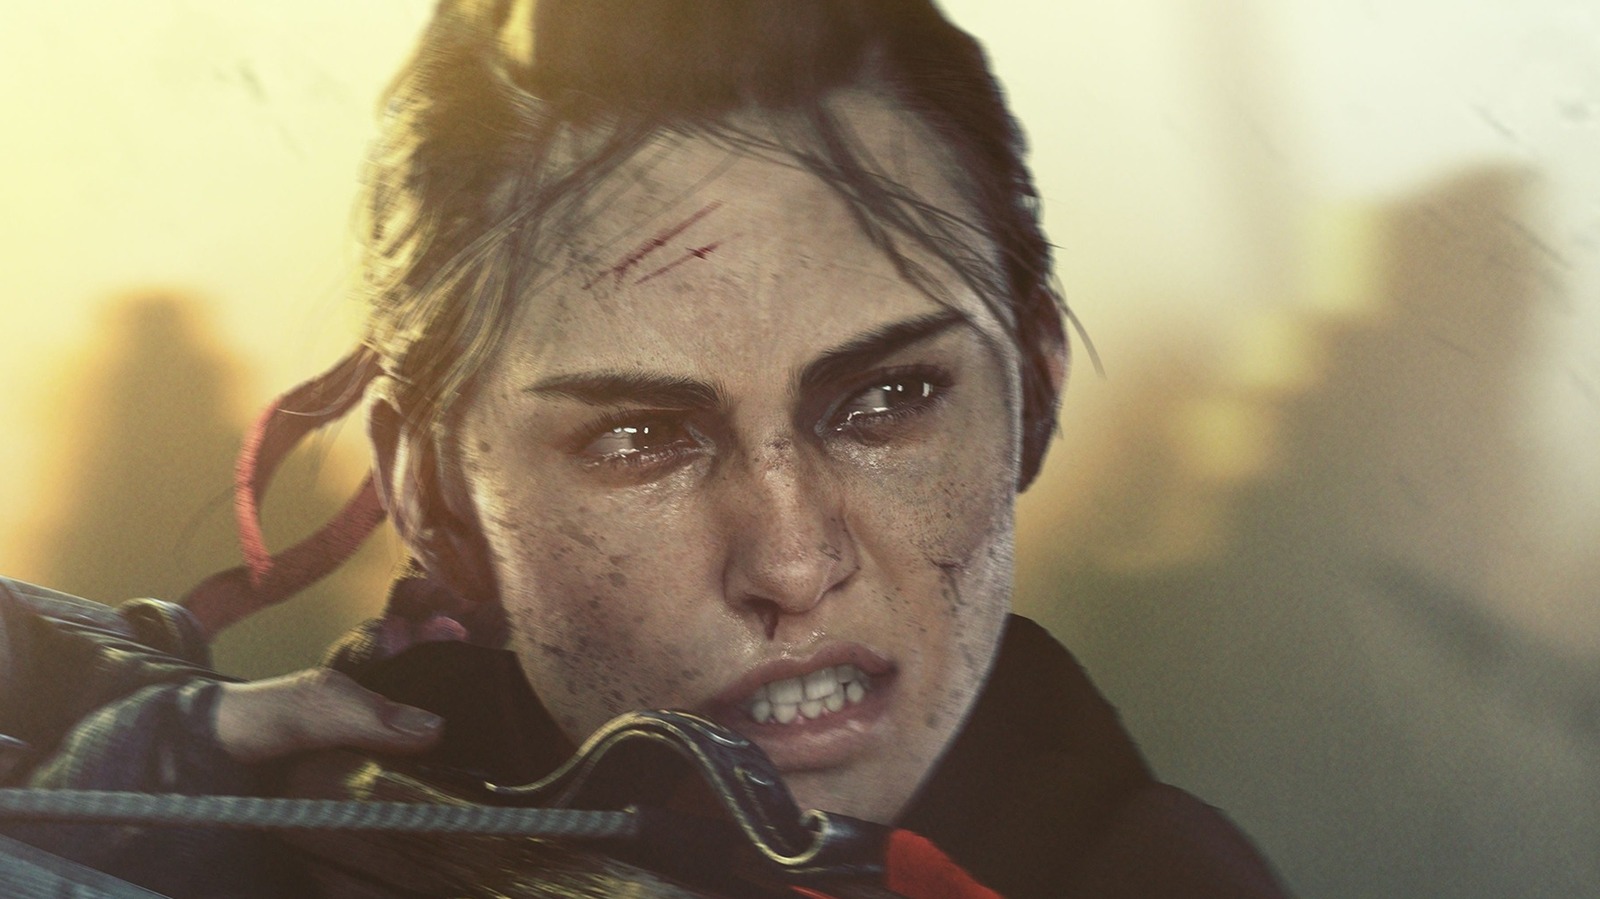 Check Out This Stunning A Plague Tale: Requiem Collector's Edition 